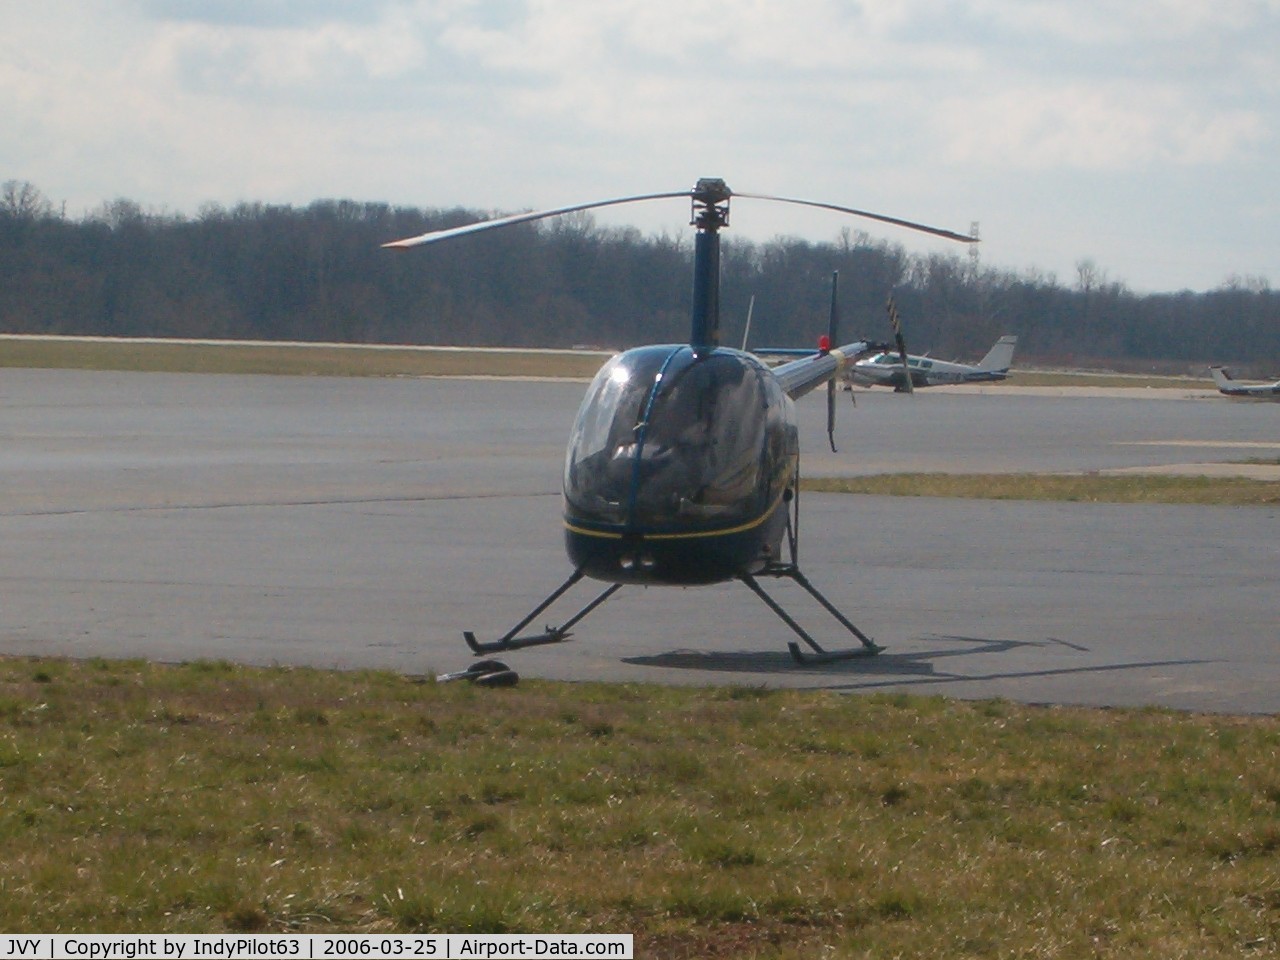 Clark Regional Airport (JVY) - ...lots of Robinson helicopter traffic at this airport...